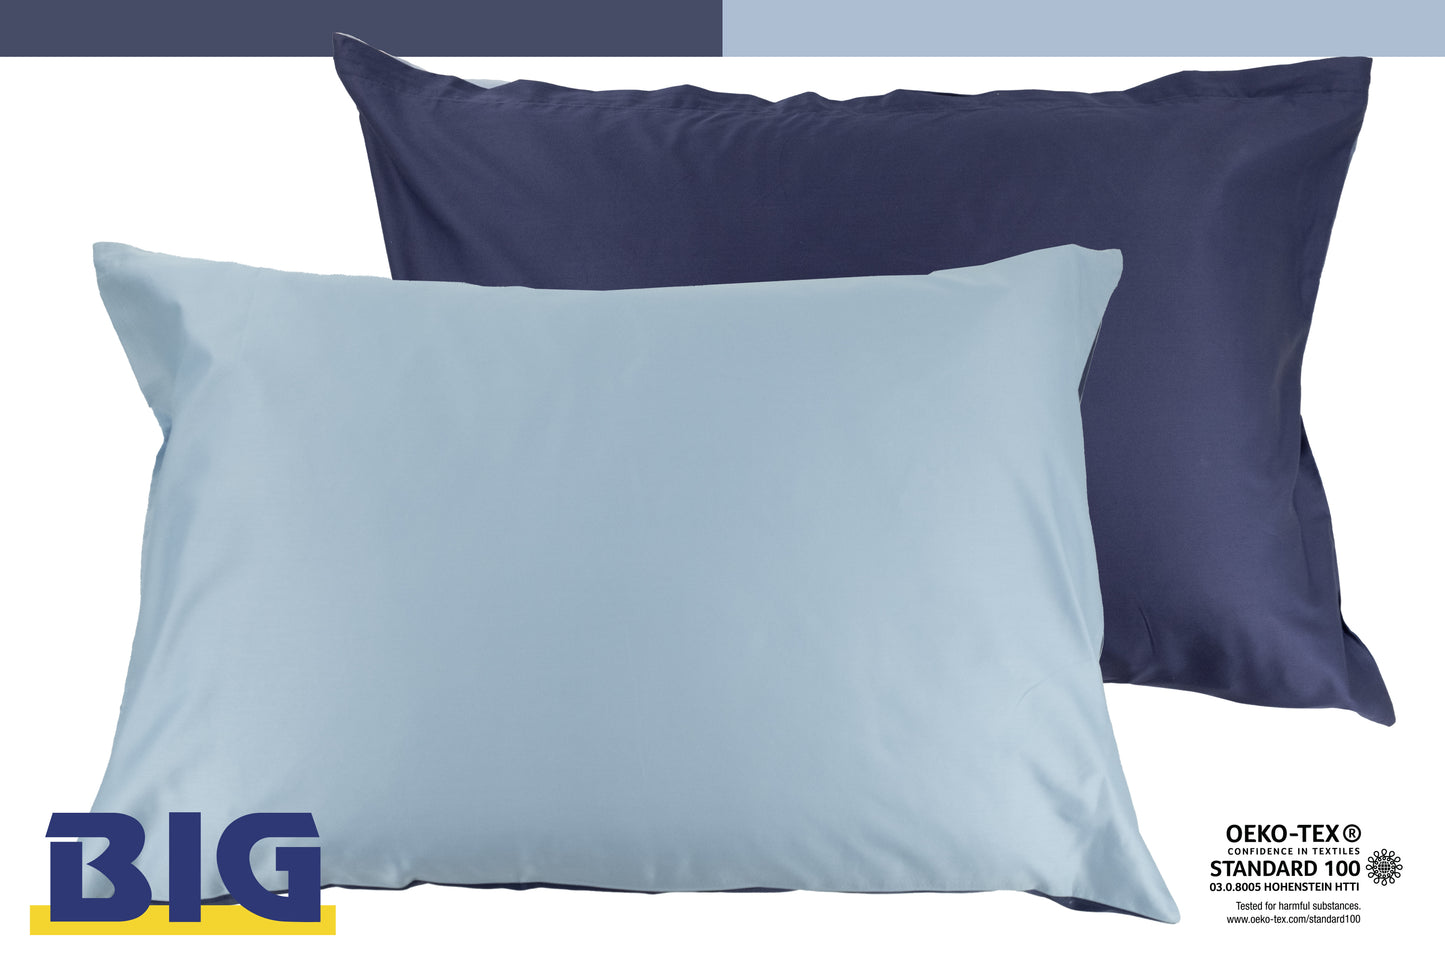 Luxury Essential 100% Pillow Cover